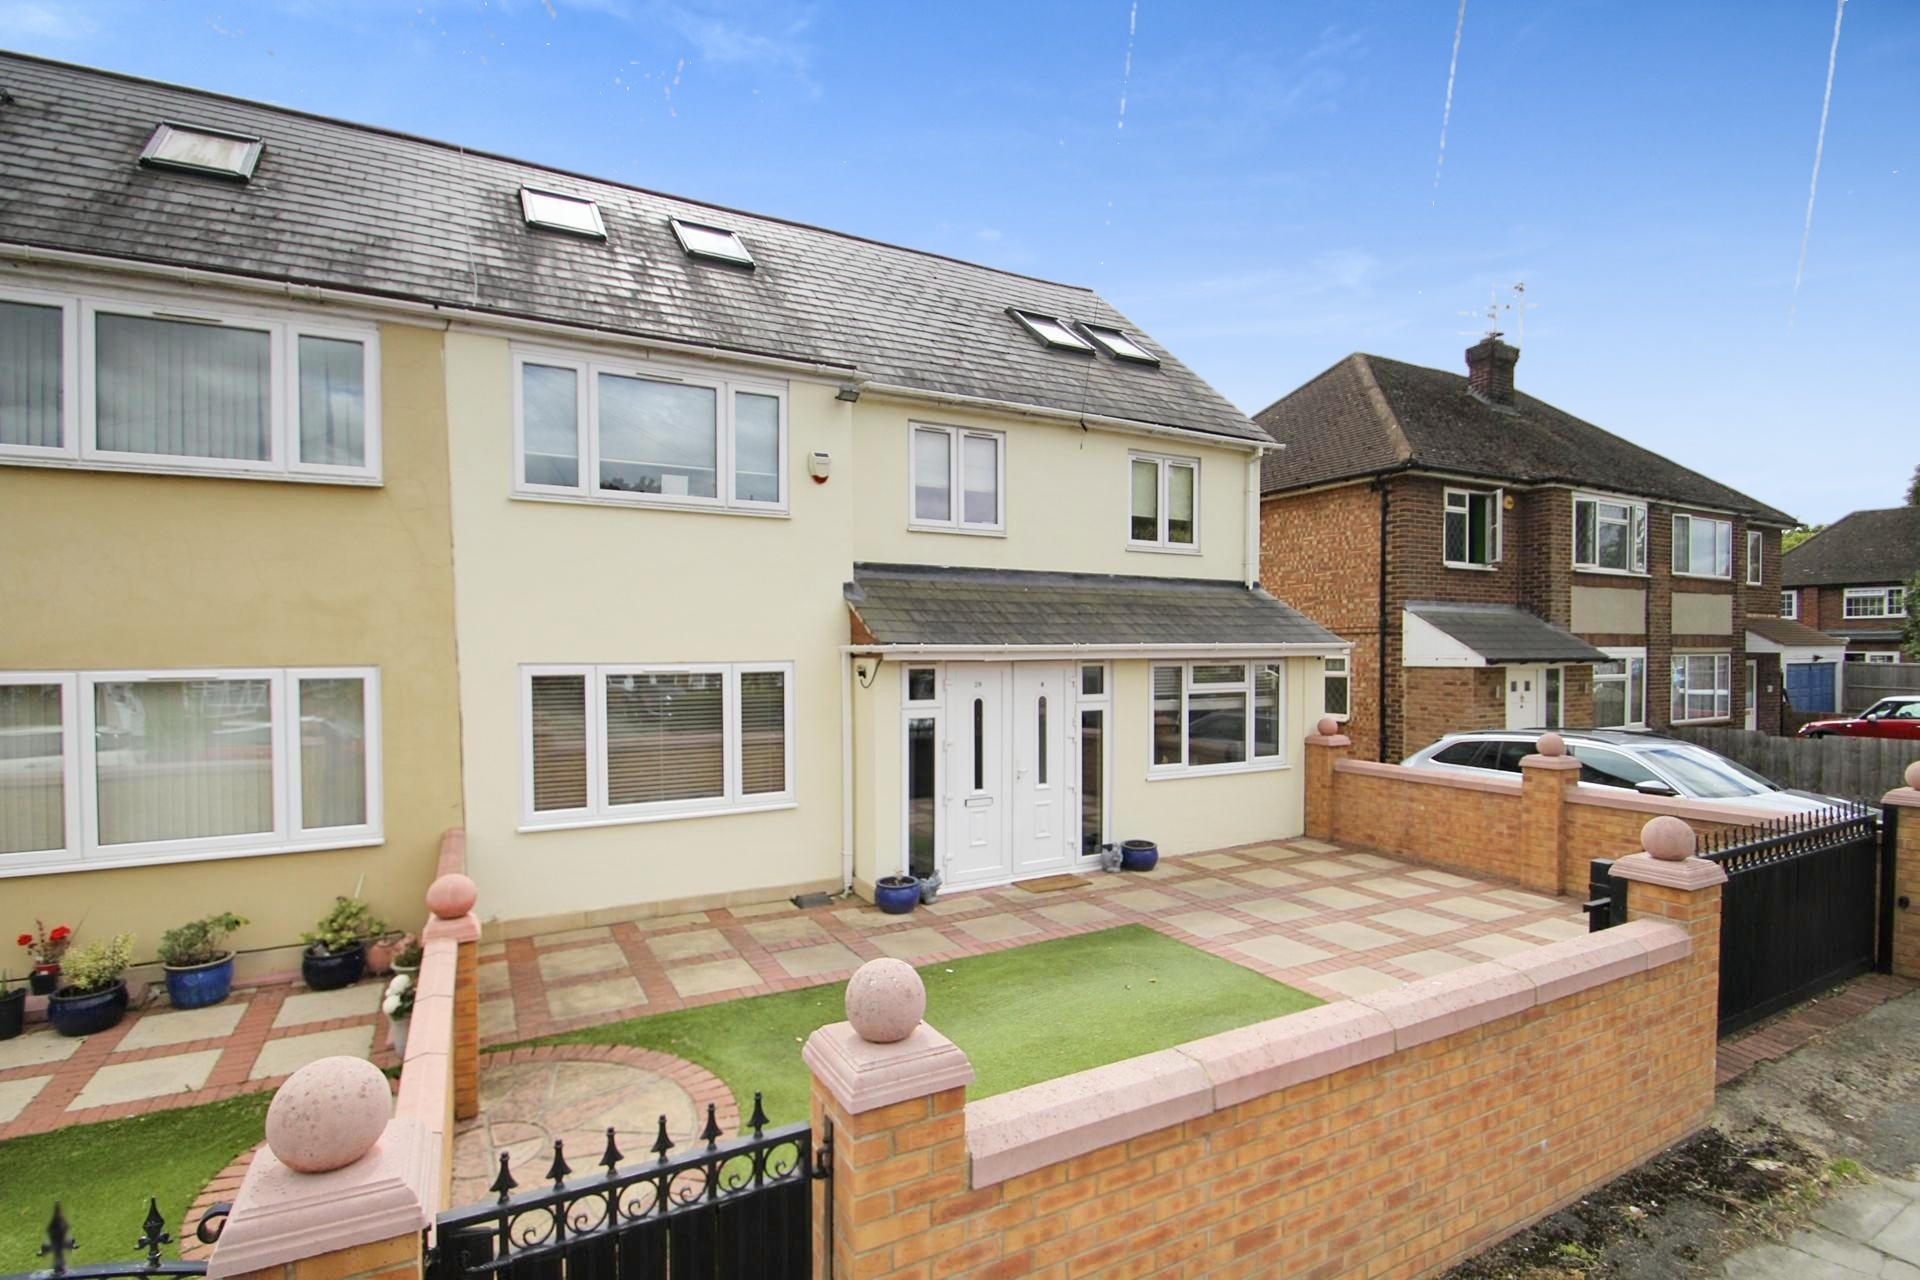 <p>Outstanding SIX BEDROOM, FOUR BATHROOM Semi Detached House with a gated driveway and two reception rooms. Part furnished. Available from early August.</p>